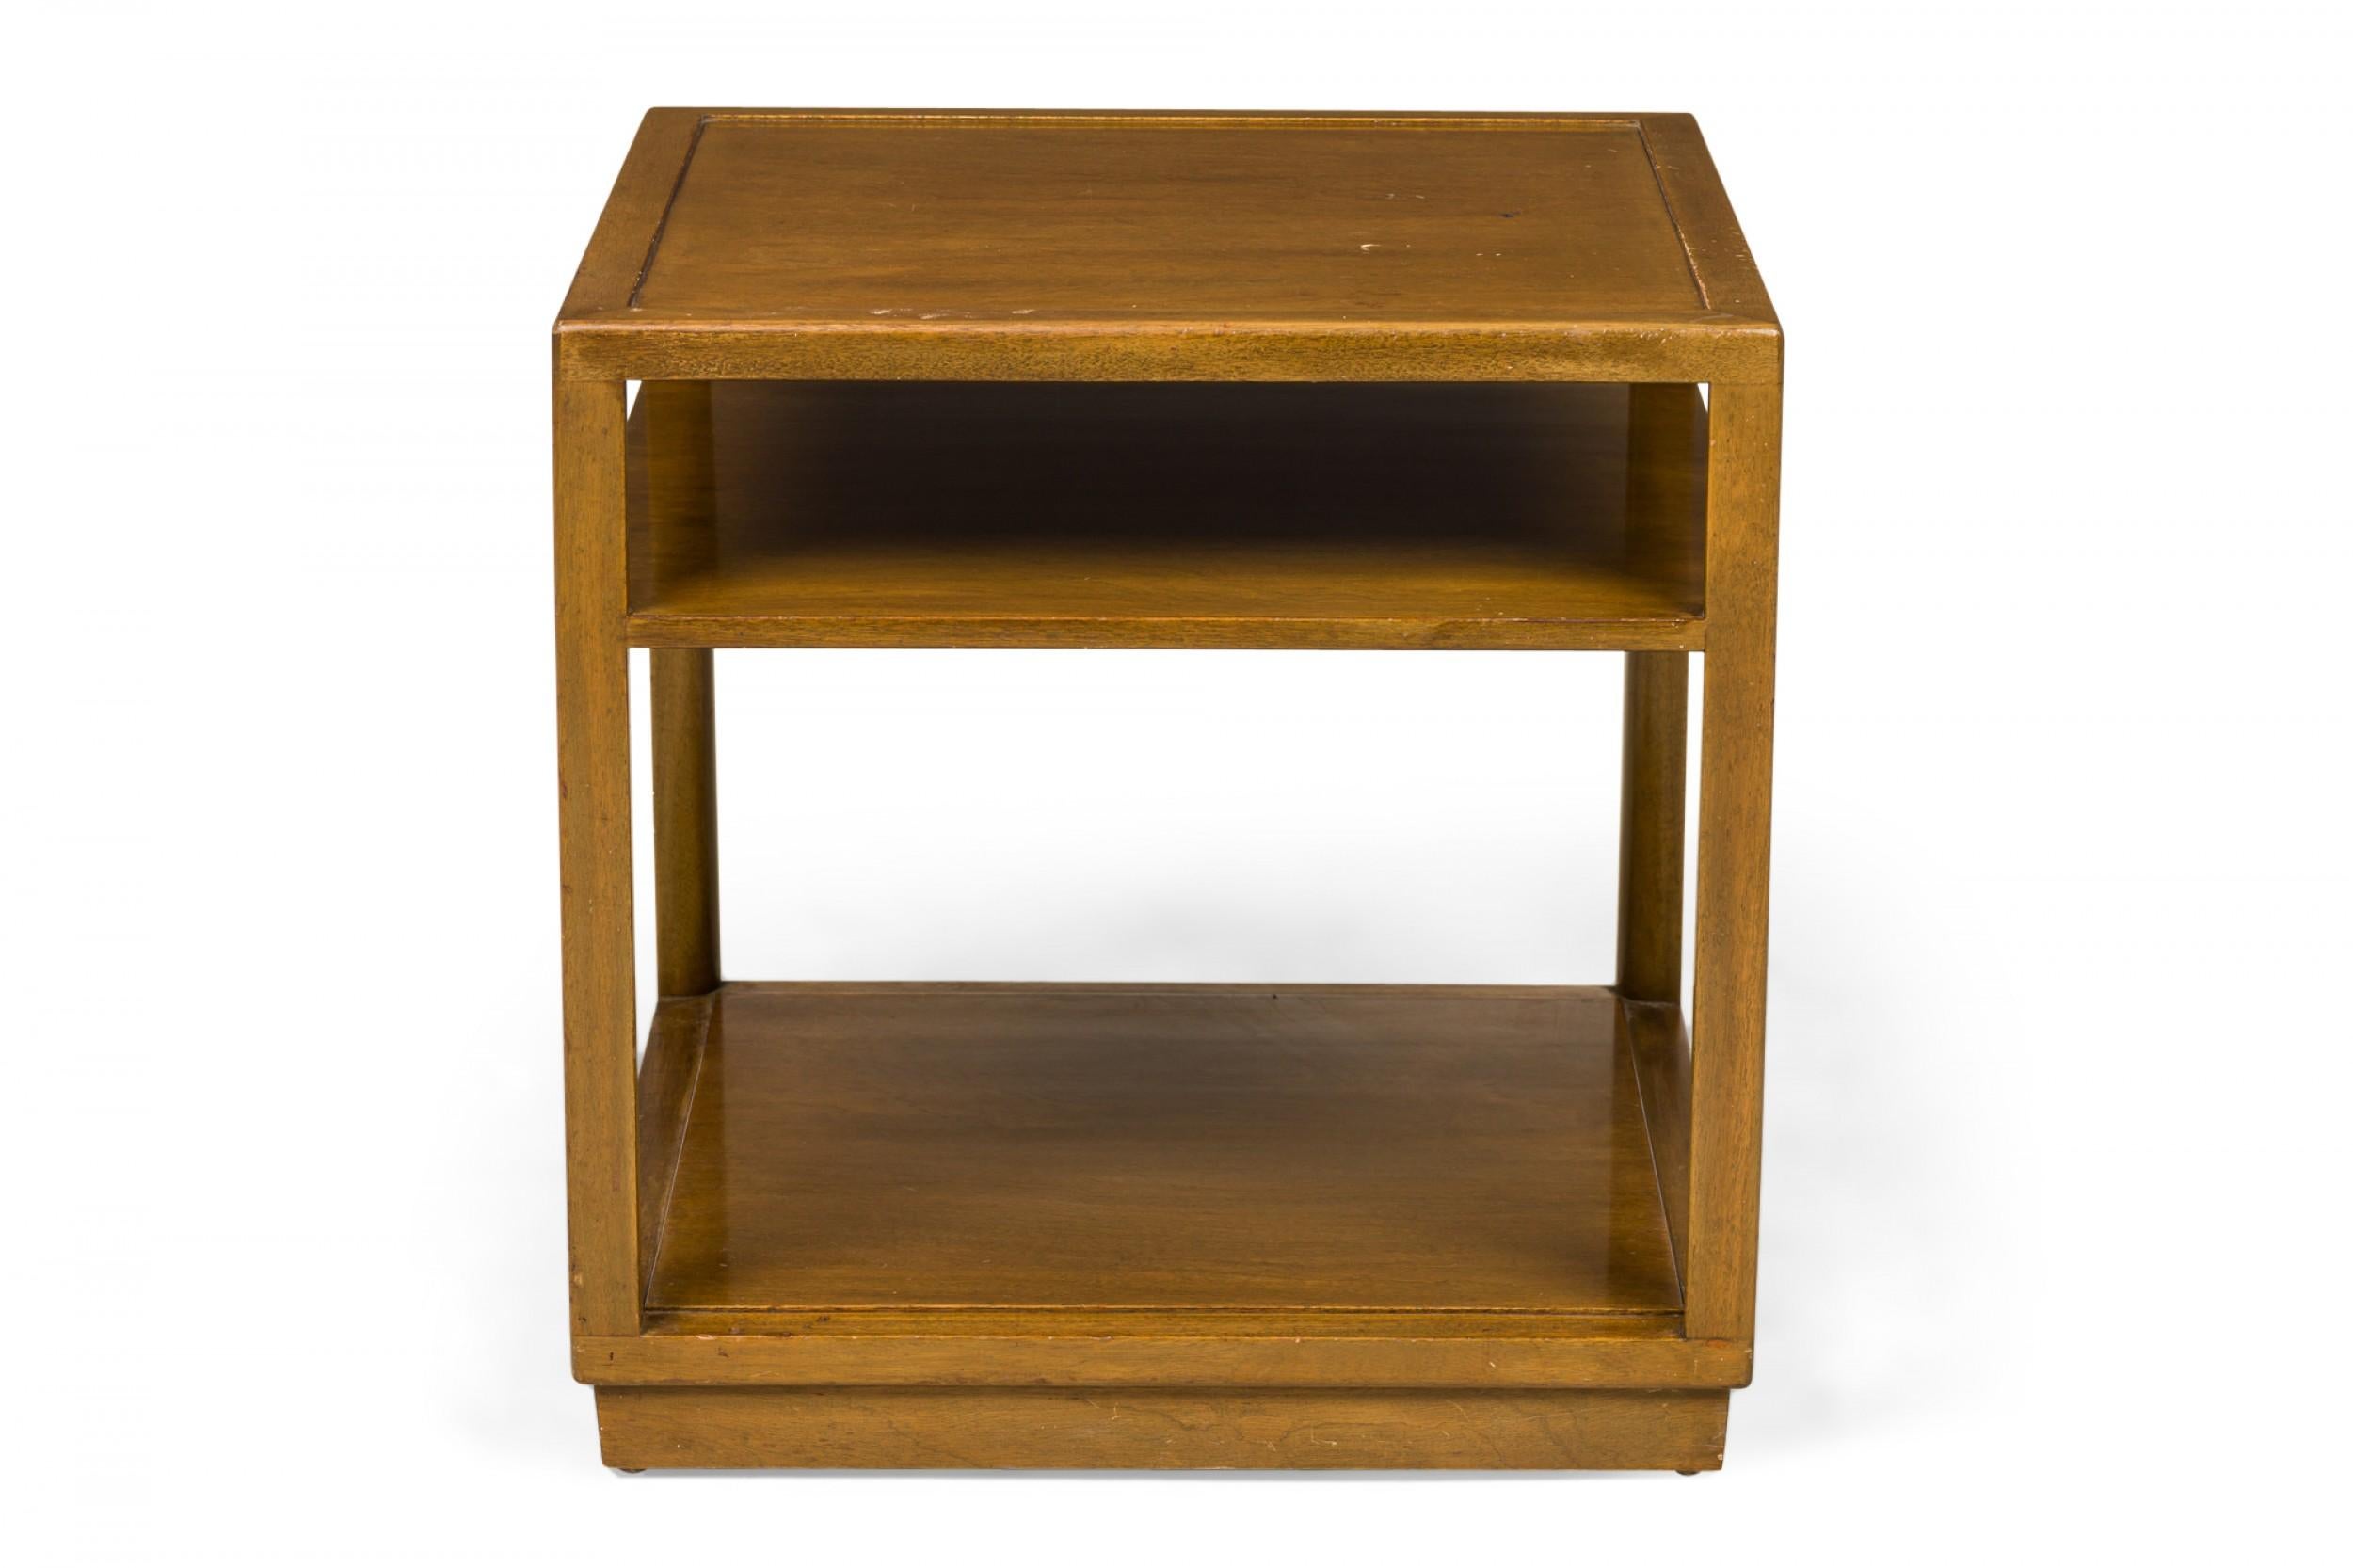 American Mid-Century square lacquered wooden end / side table with an open shelf below the square top, resting on a solid stepped base that creates as a taller lower shelf. (EDWARD WORMLEY FOR DUNBAR FURNITURE COMPANY)(Similar tables: DUF0648,